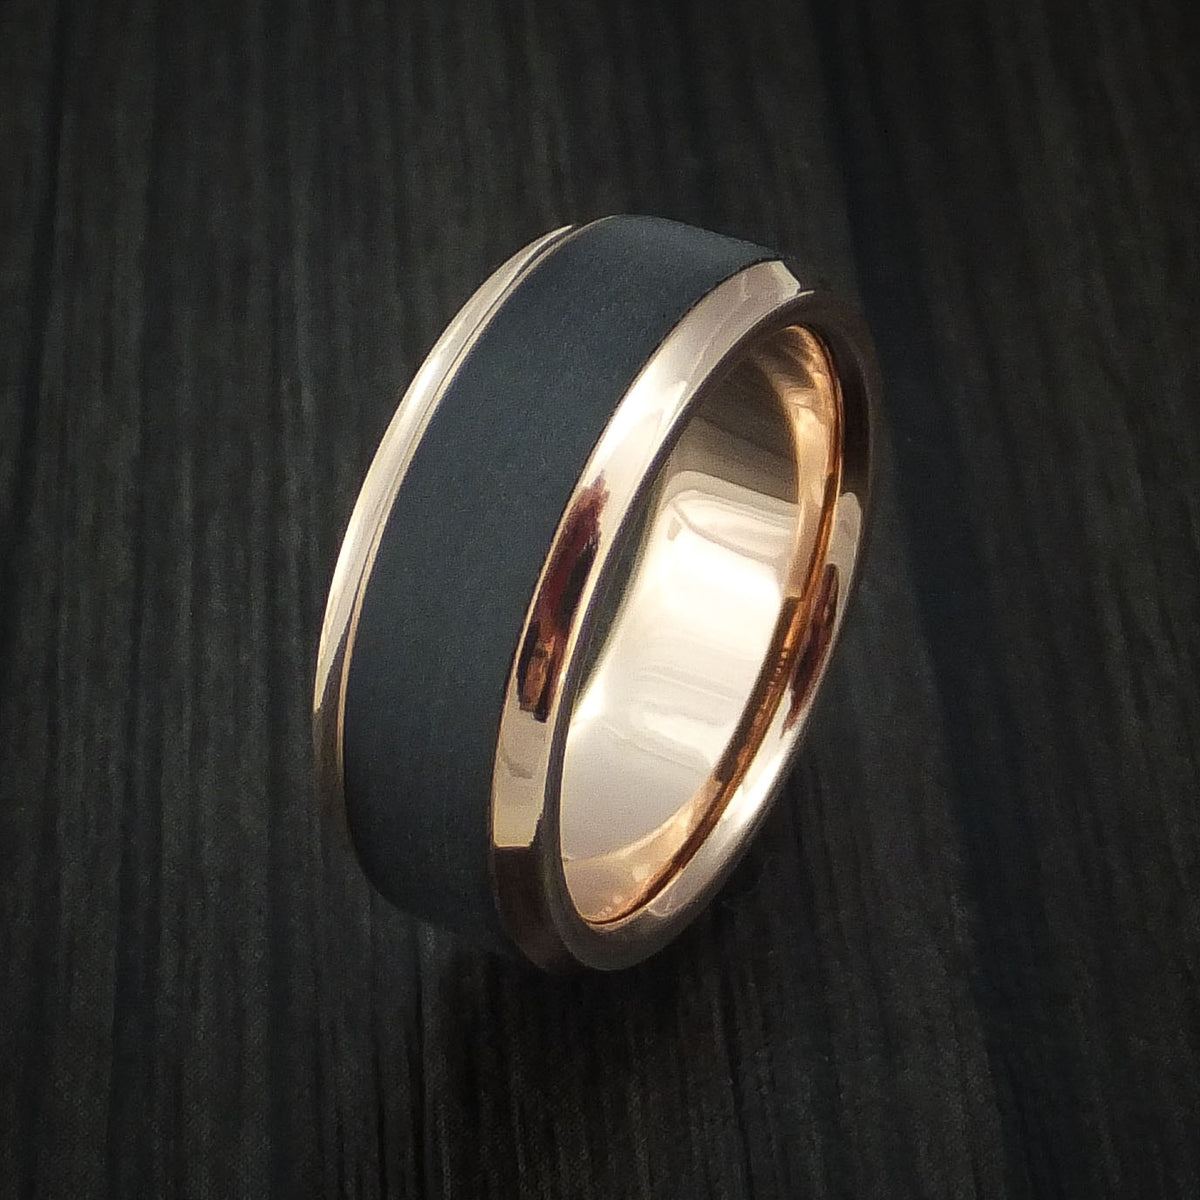 14K Rose Gold with Carbon Fiber Custom Made Men's Band | Revolution Jewelry